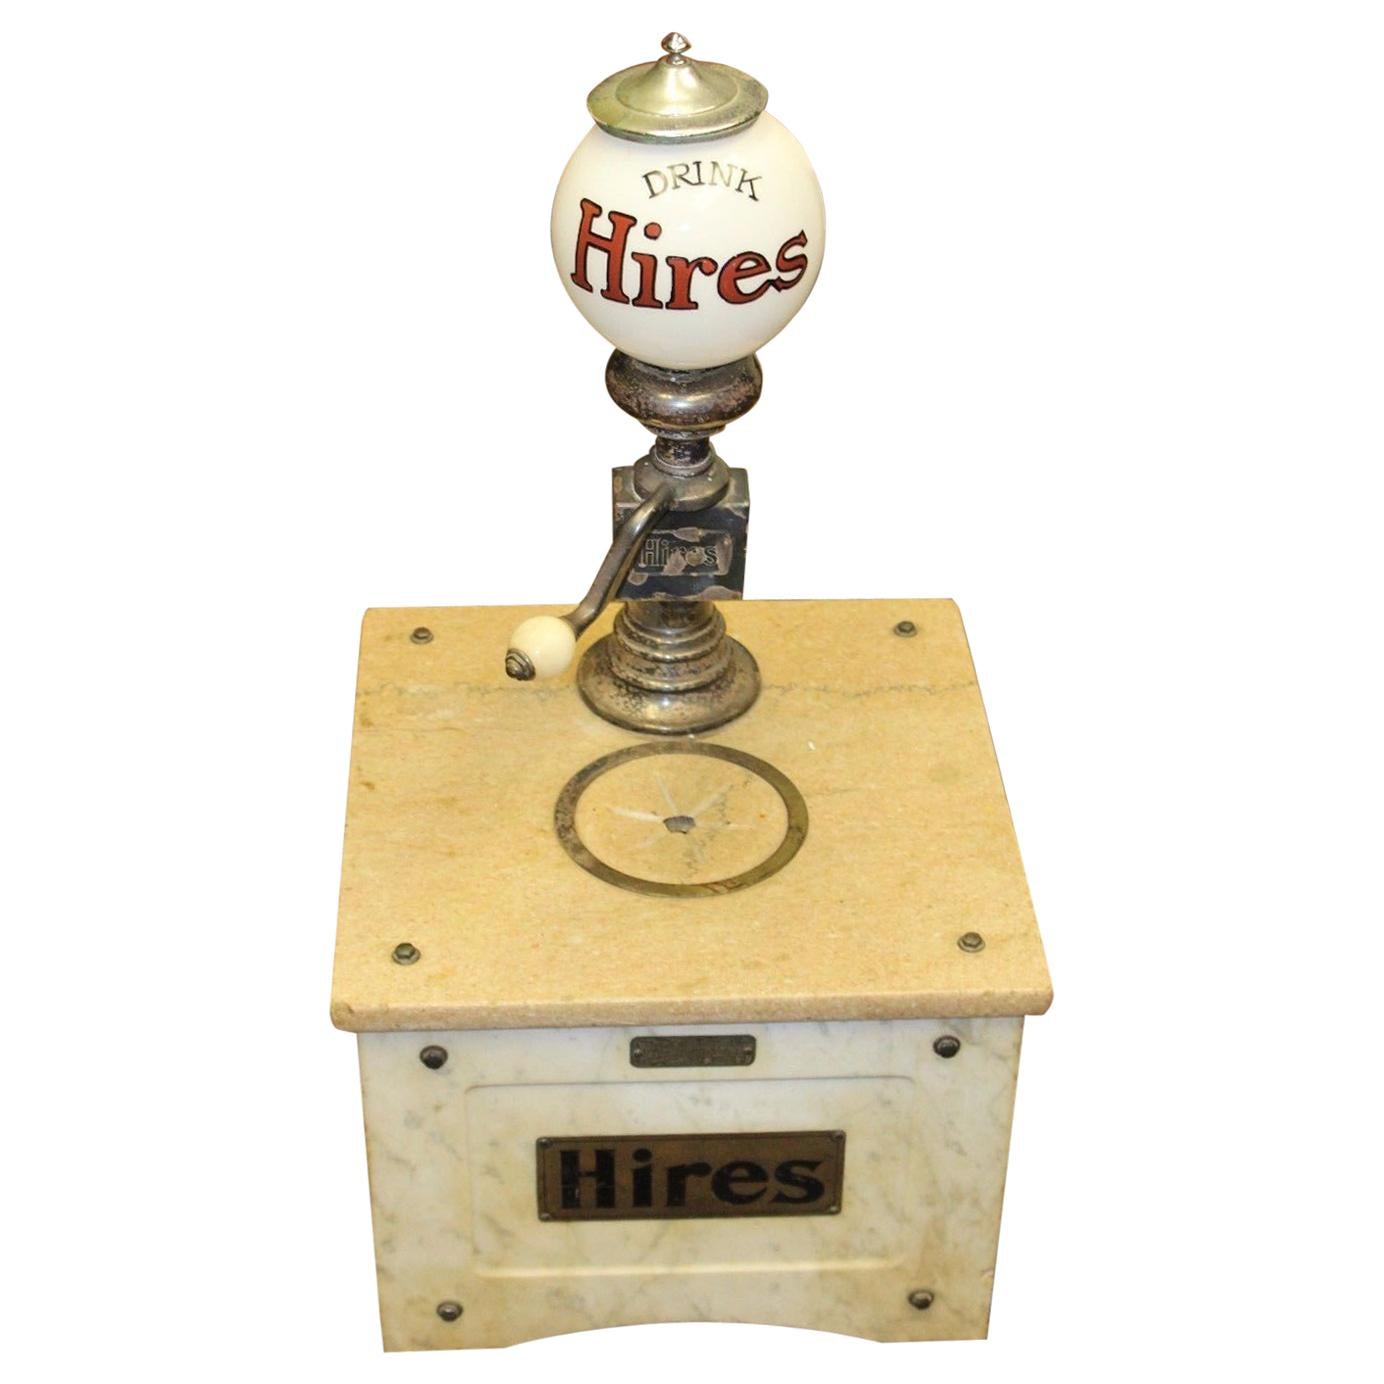 1909 Hires Soda Munimaker Syrup Marble Soda Fountain Dispenser For Sale